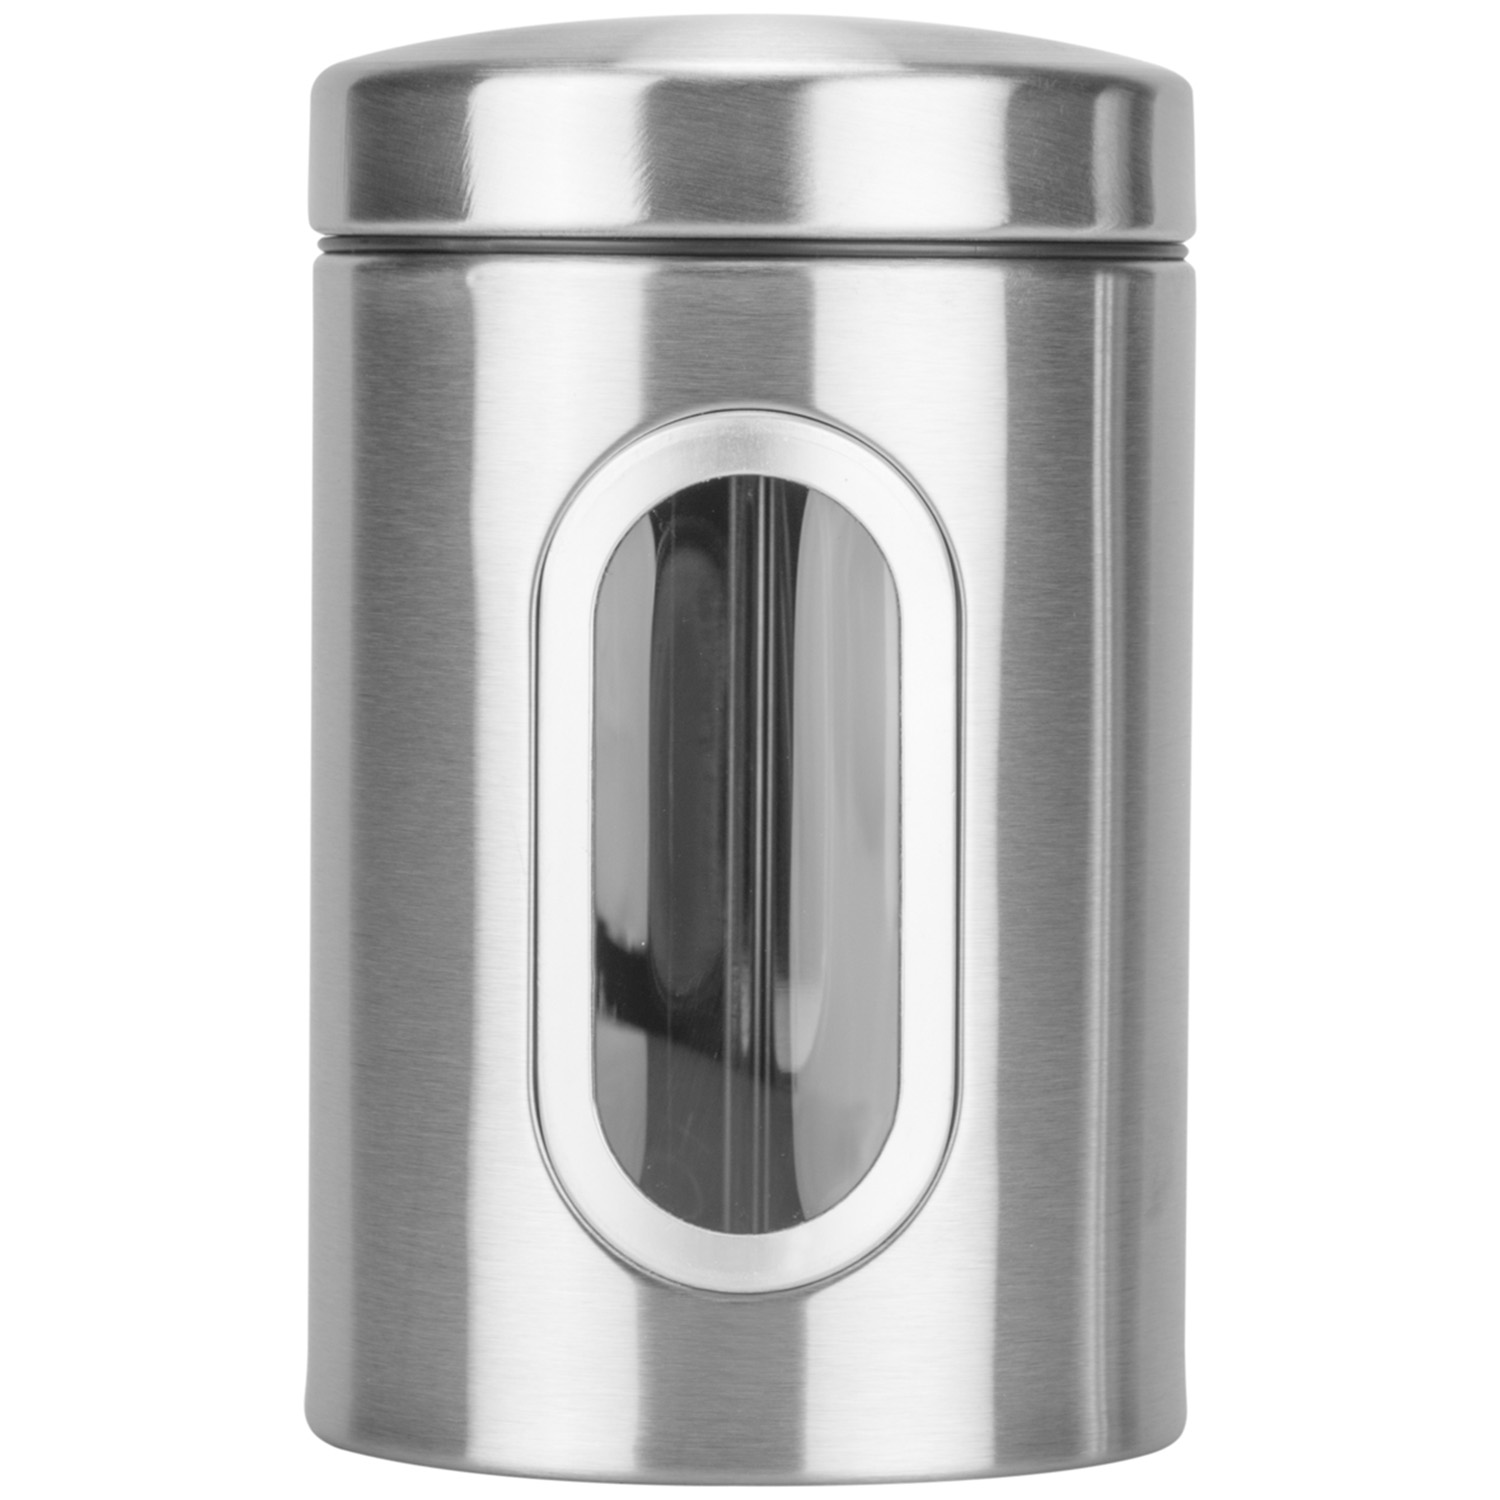 9.5cm Stainless Steel Canister with Window Image